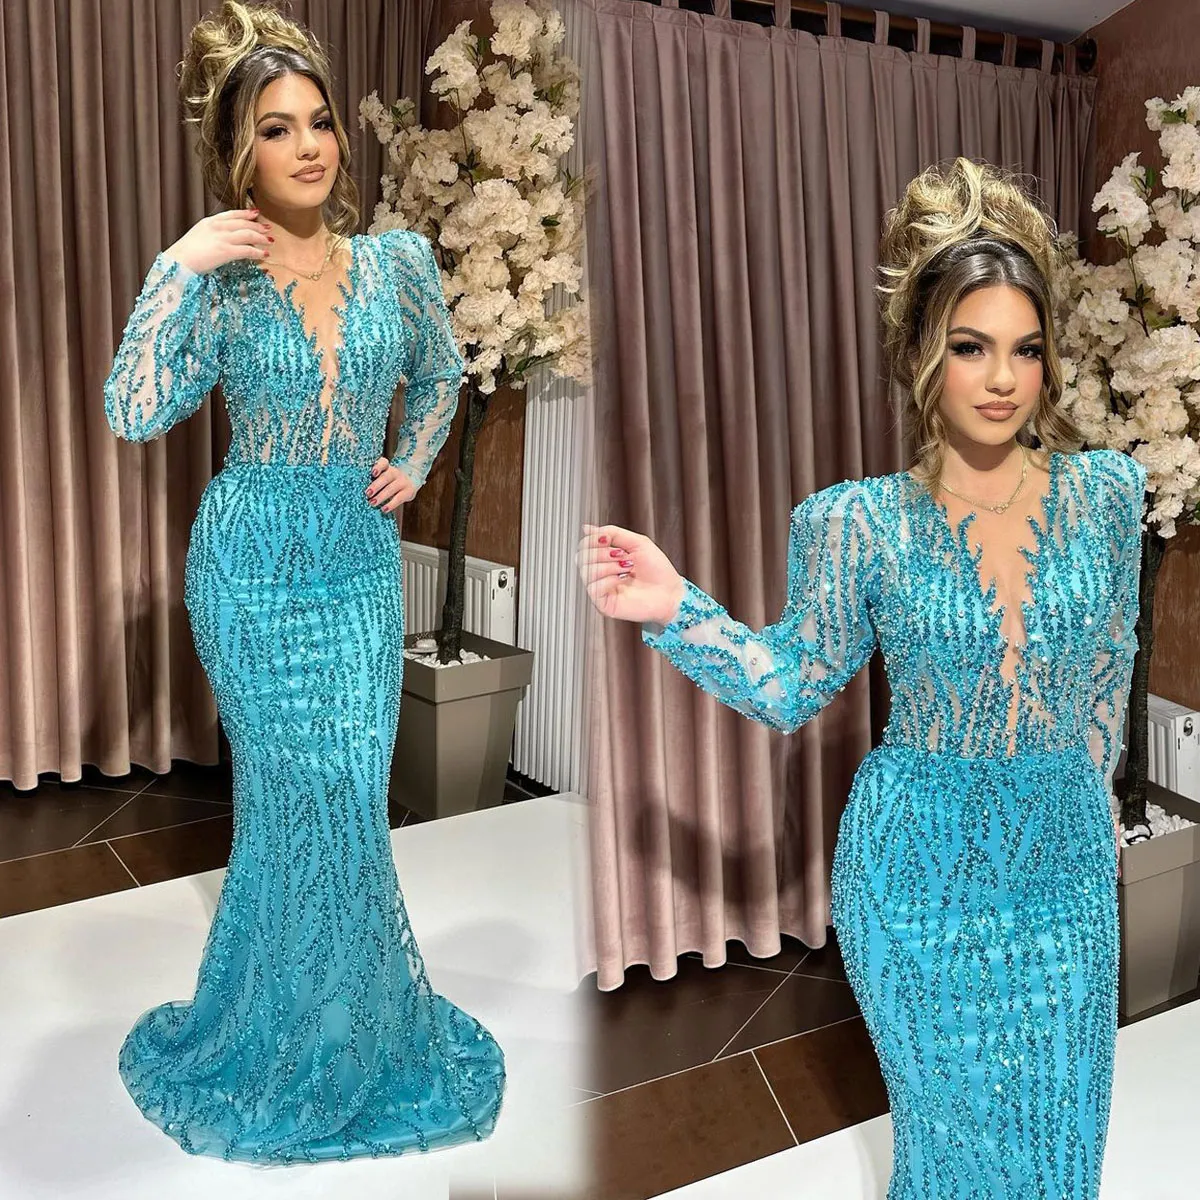 Exquisite Beading Mermaid Evening Dresses V-Neck Portrait Special Occasion Dresses Tulle Women Sweep Train Prom Gowns for Party Customized Size D-L24017